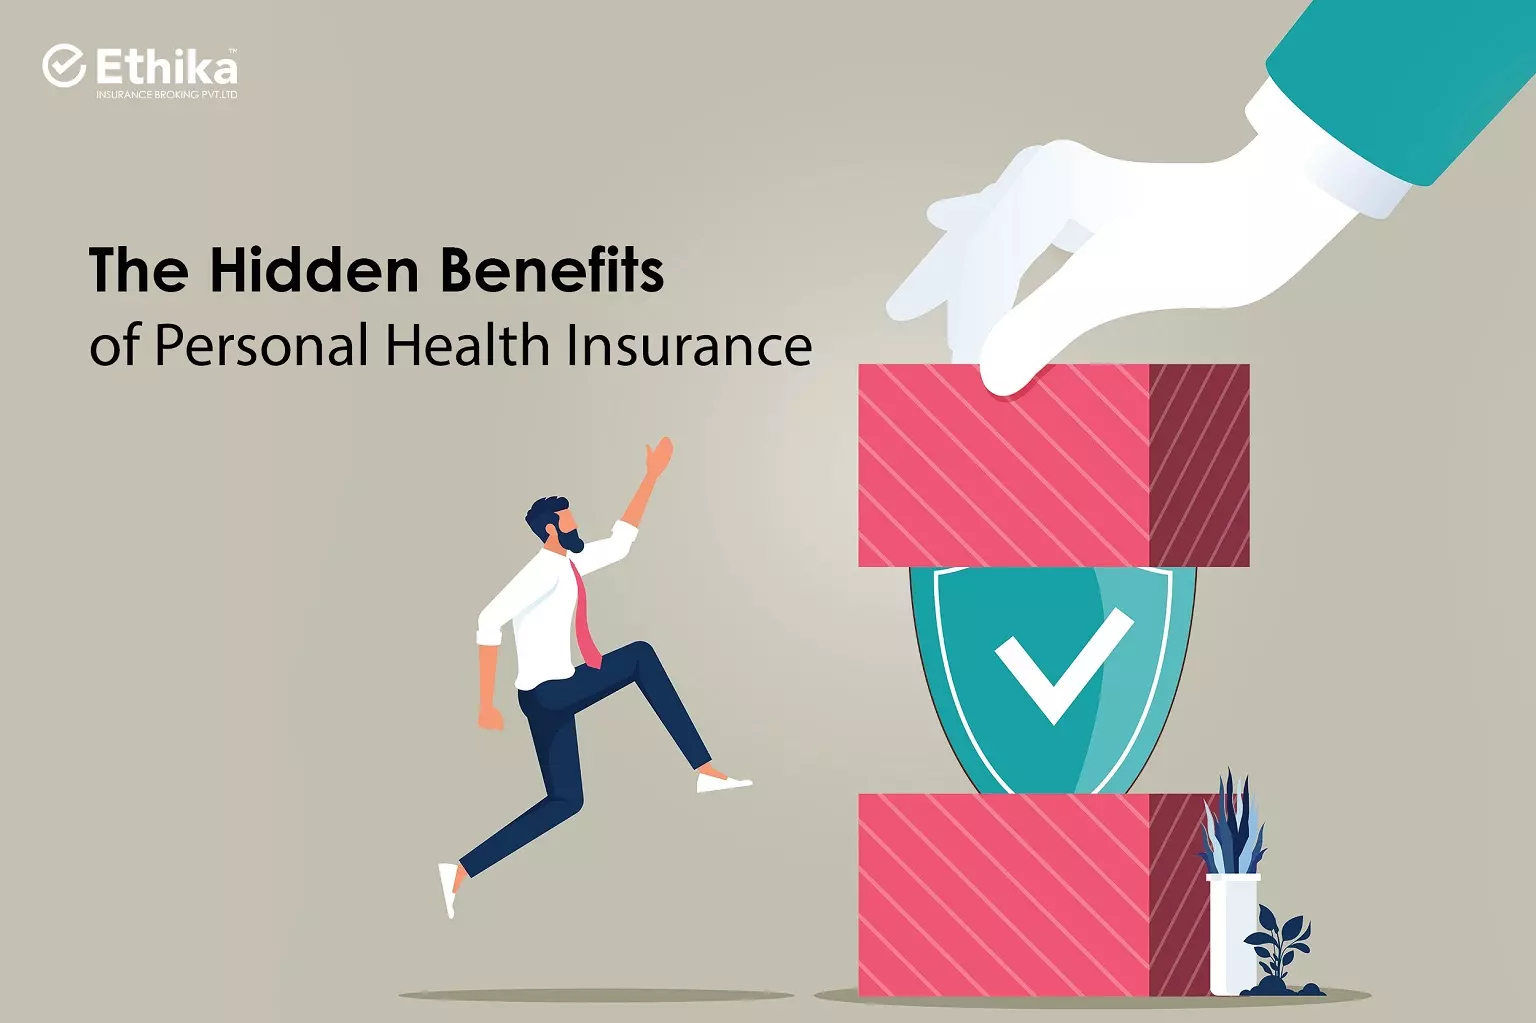 The Hidden Benefits of Personal Health Insurance